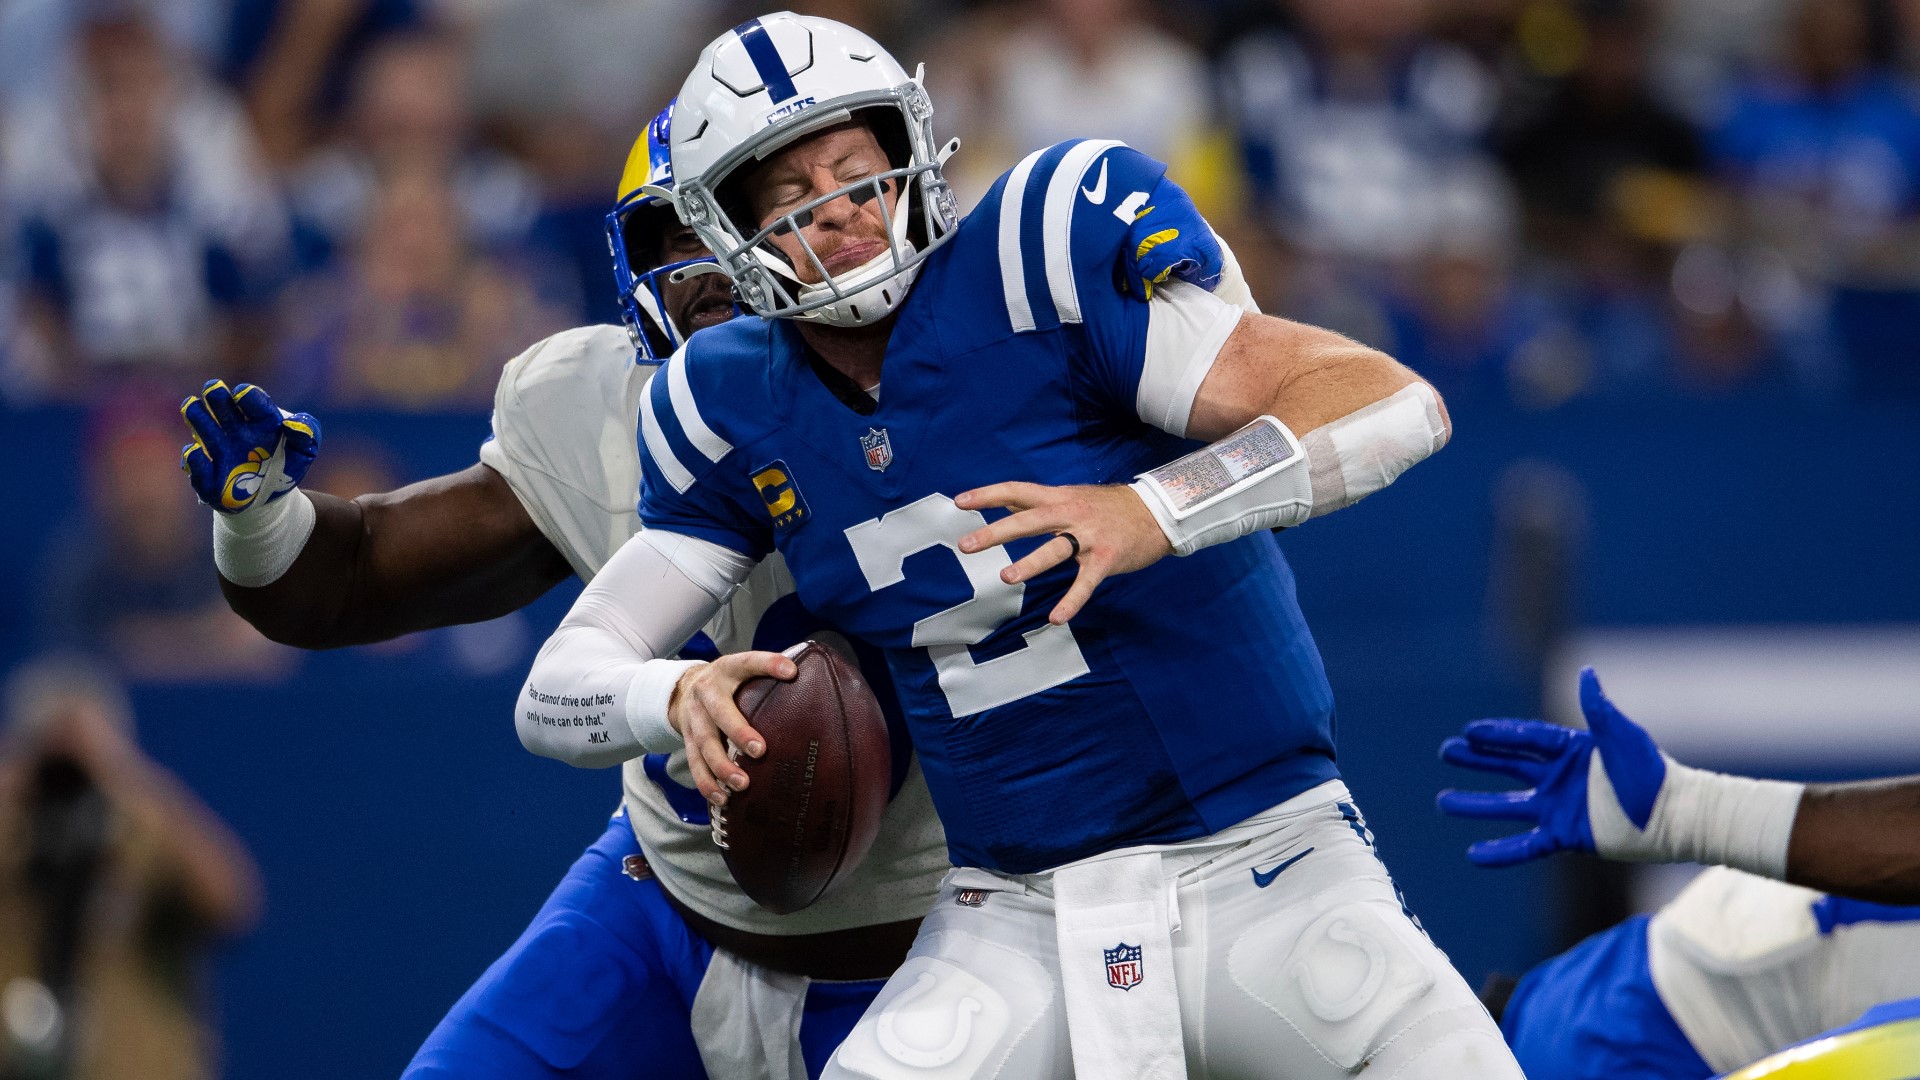 Colts head coach Frank Reich said quarterback Carson Wentz injured both of his ankles in Sunday's loss to the Los Angeles Rams.